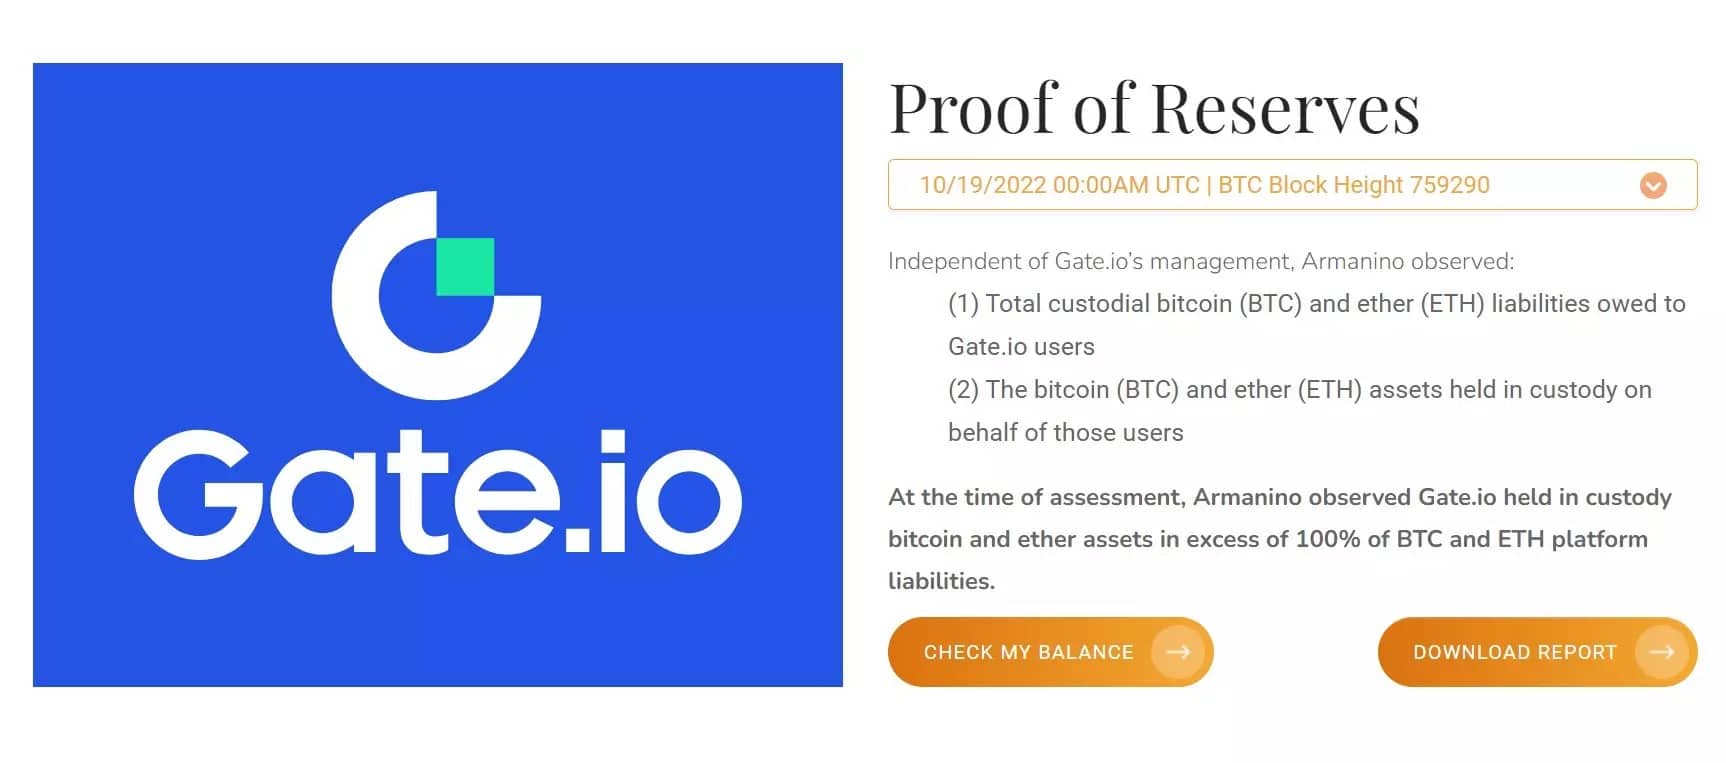 Proof of Reserve of Gate.io as of October 19